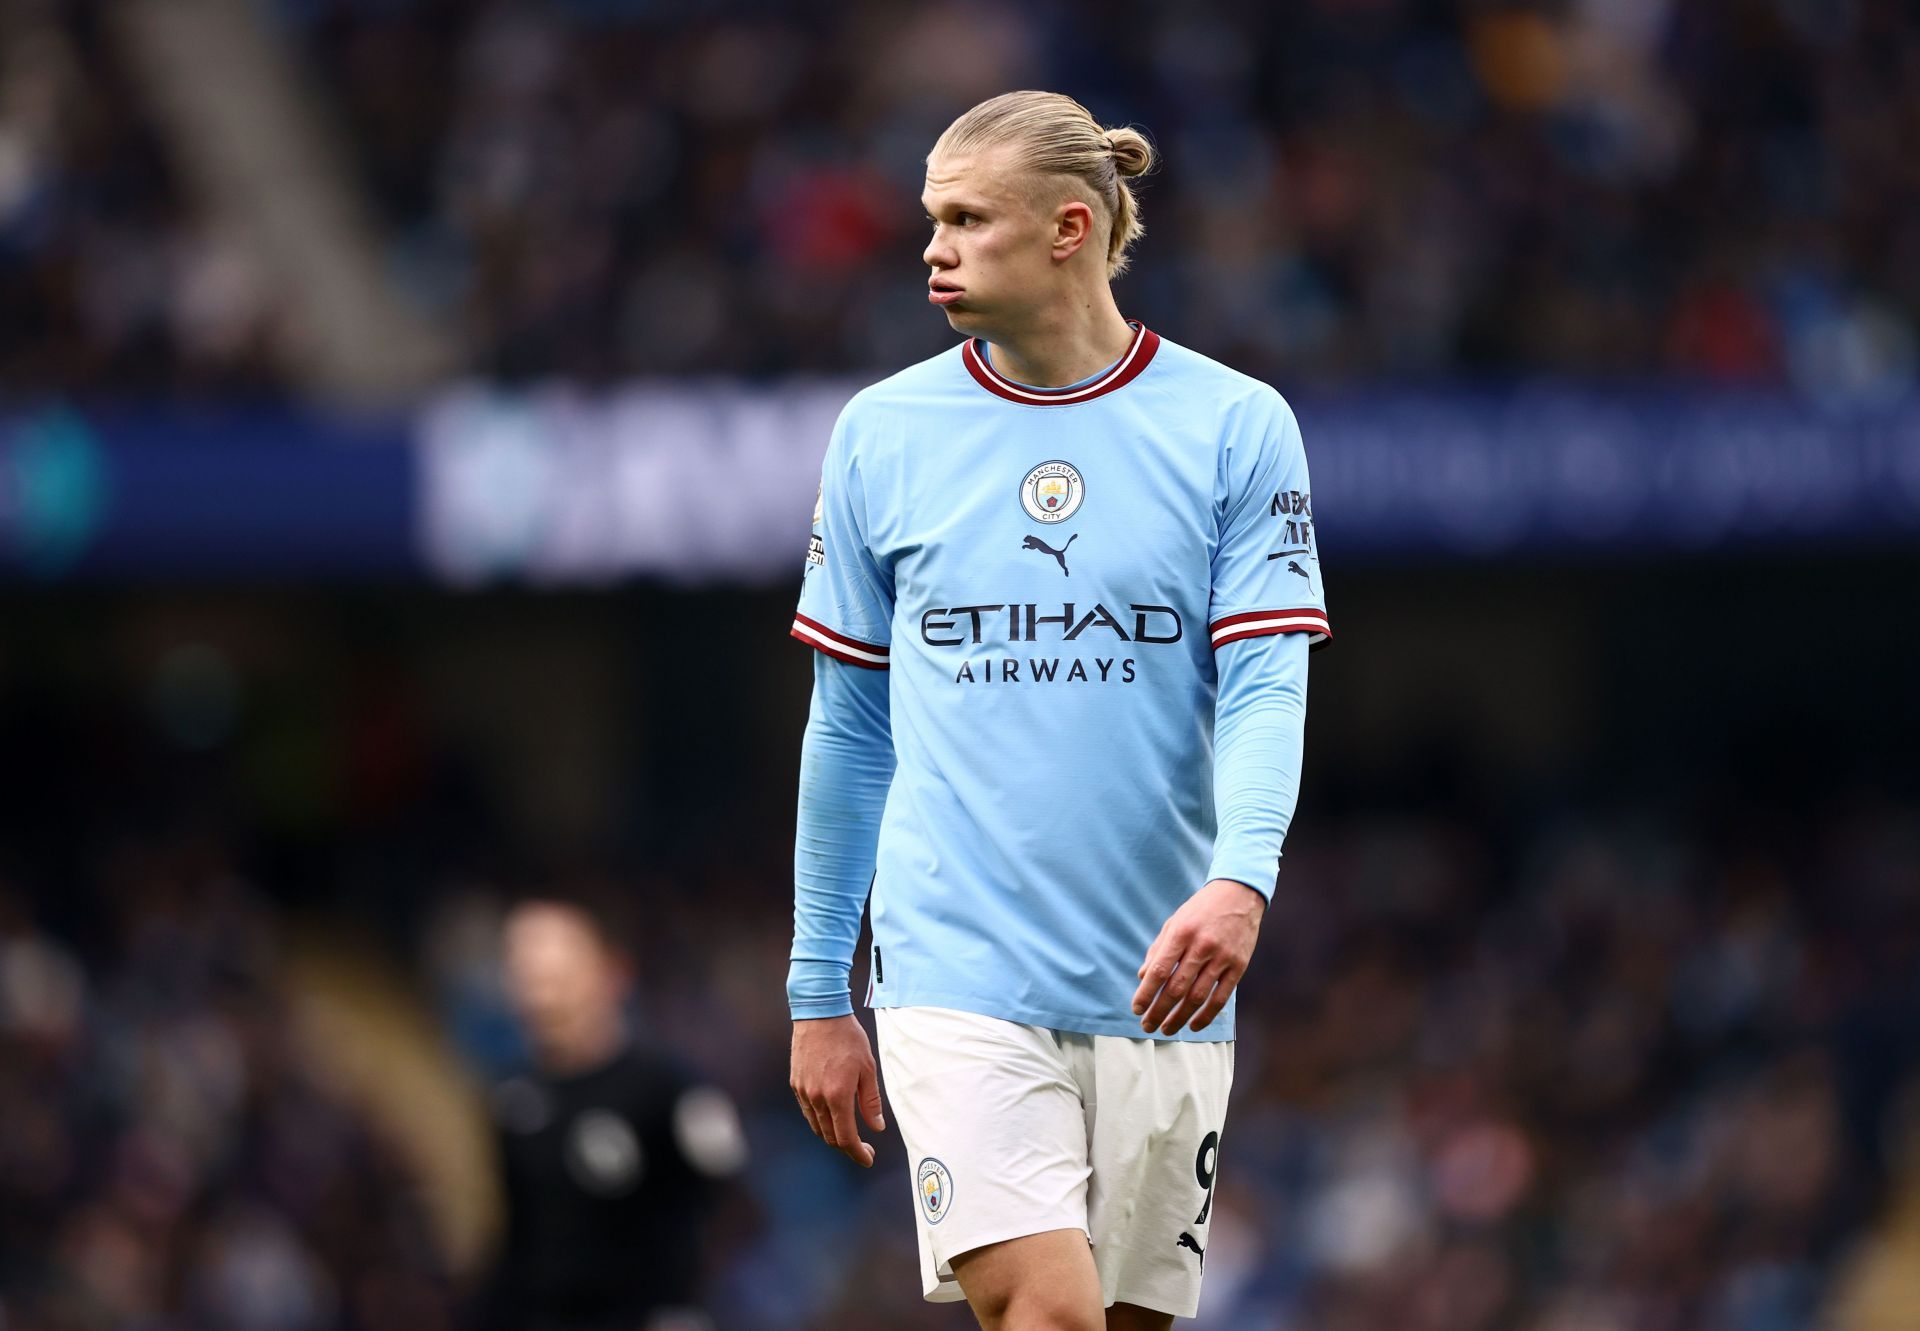 Erling Haaland has scored 31 goals from 27 appearances for Manchester City this season.